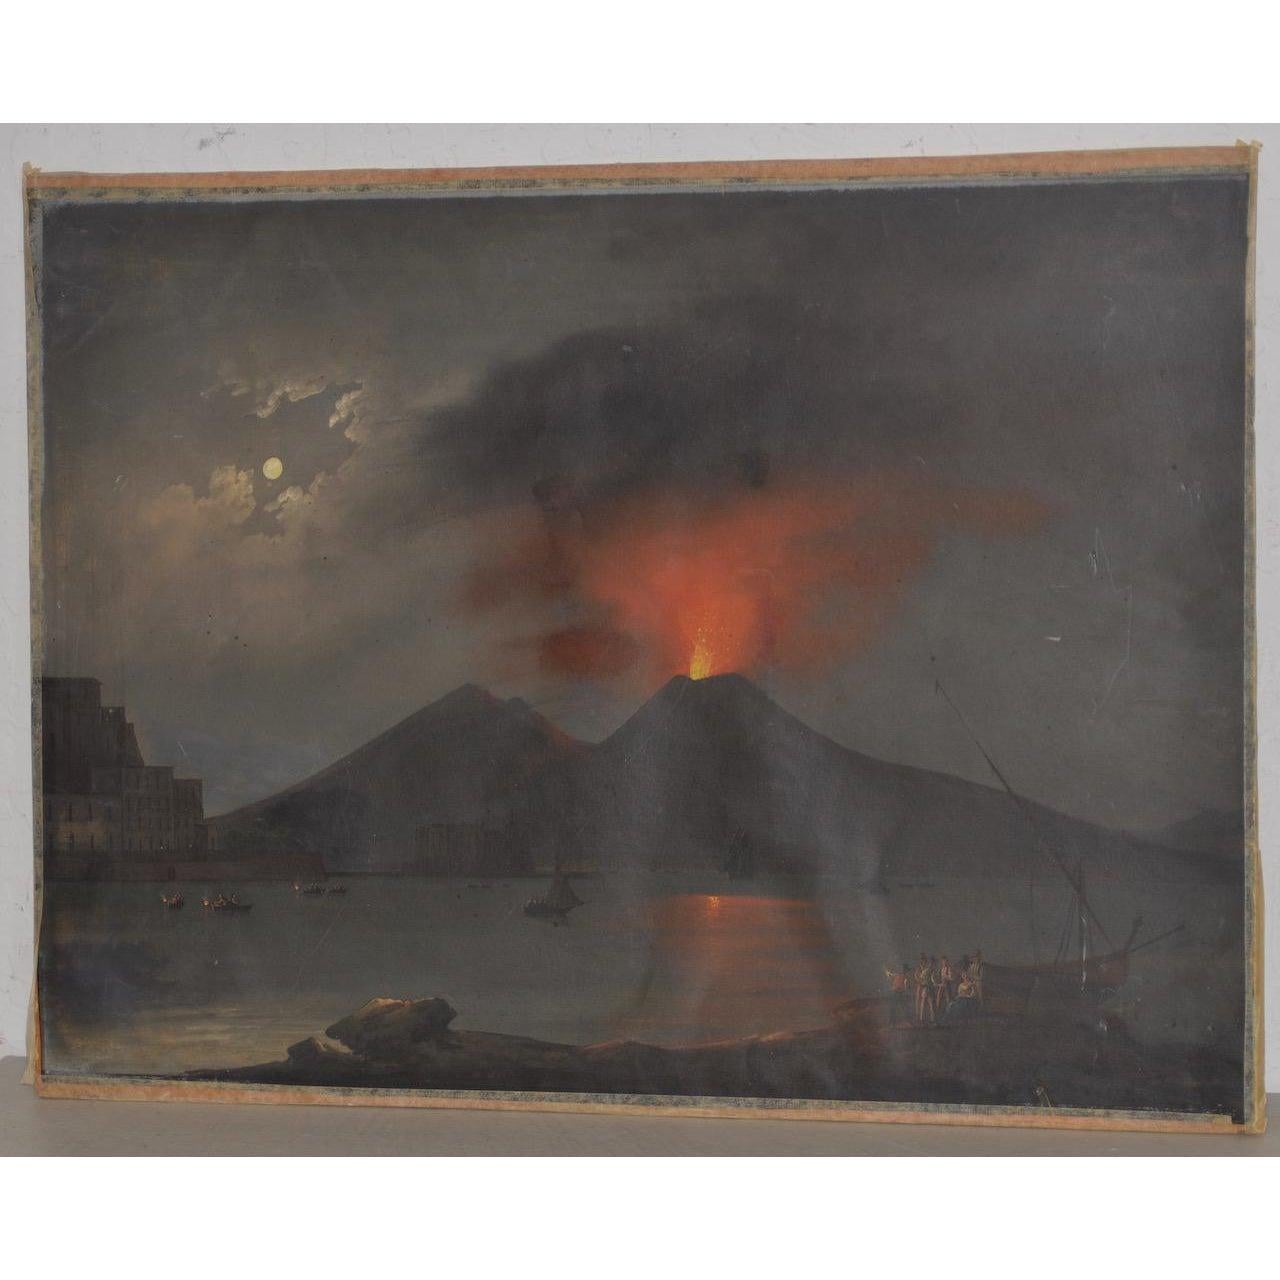 Unknown Landscape Painting - 18th to 19th Century "Mt Vesuvius" Oil Painting